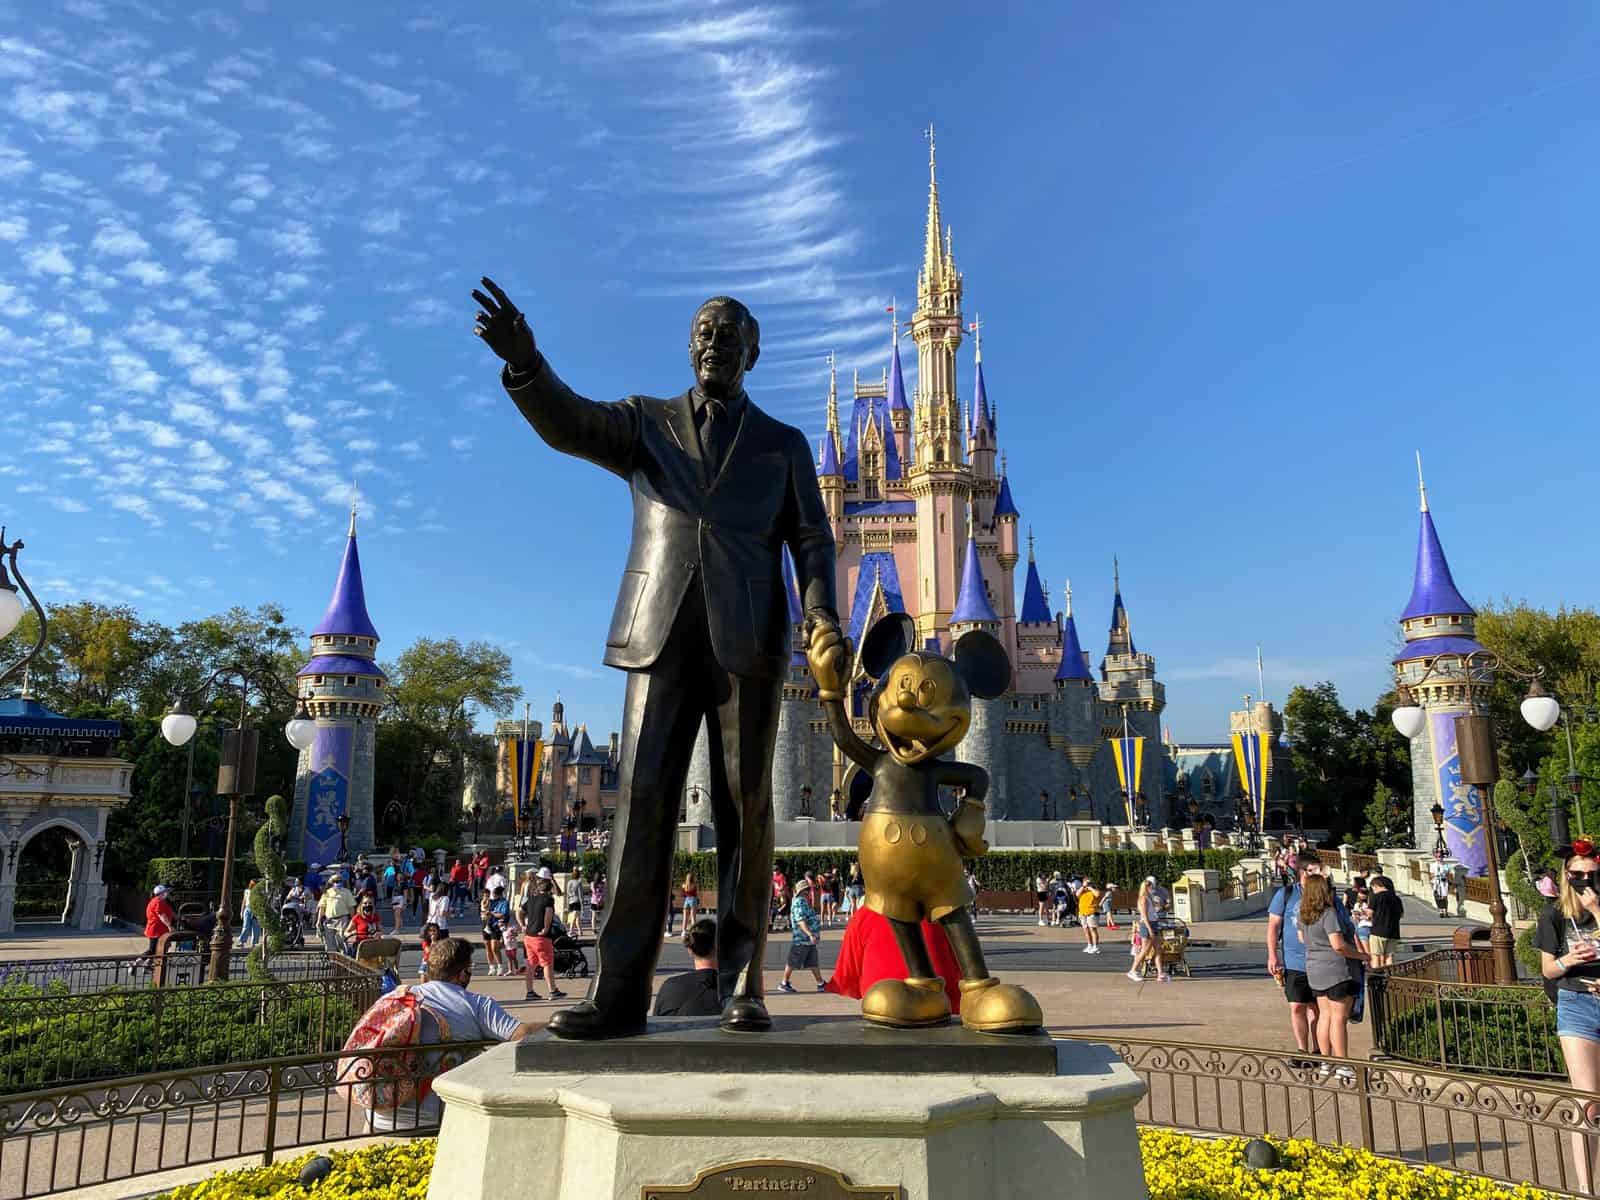 Taking a child on the autism spectrum to Disney World